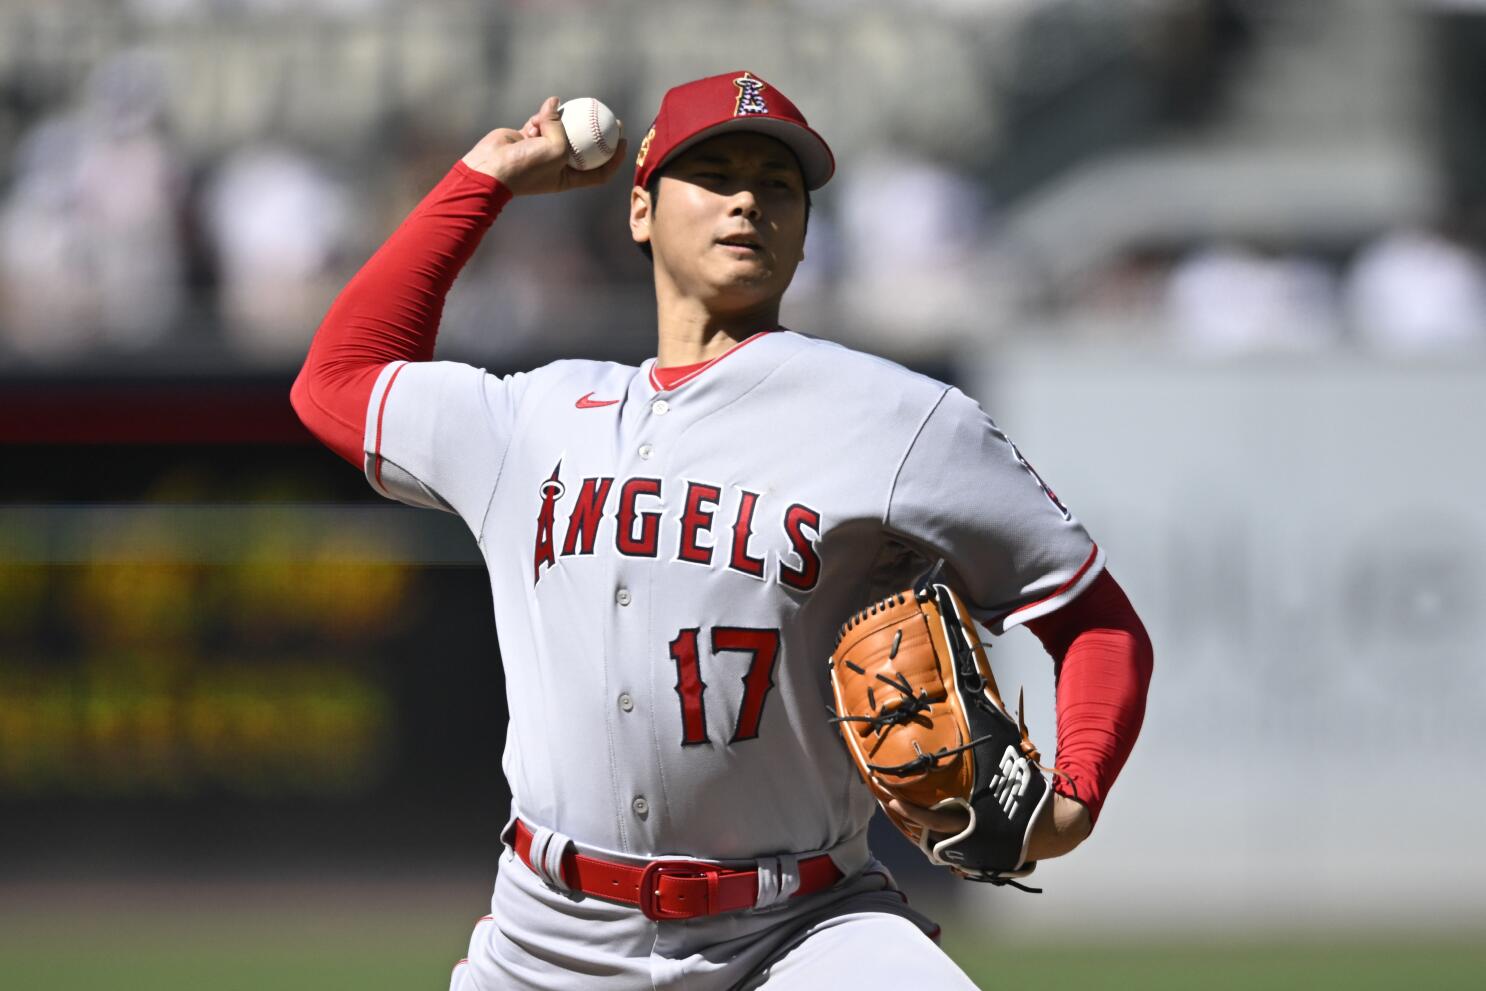 Baseball: Shohei Ohtani makes early exit from MLB All-Star Home